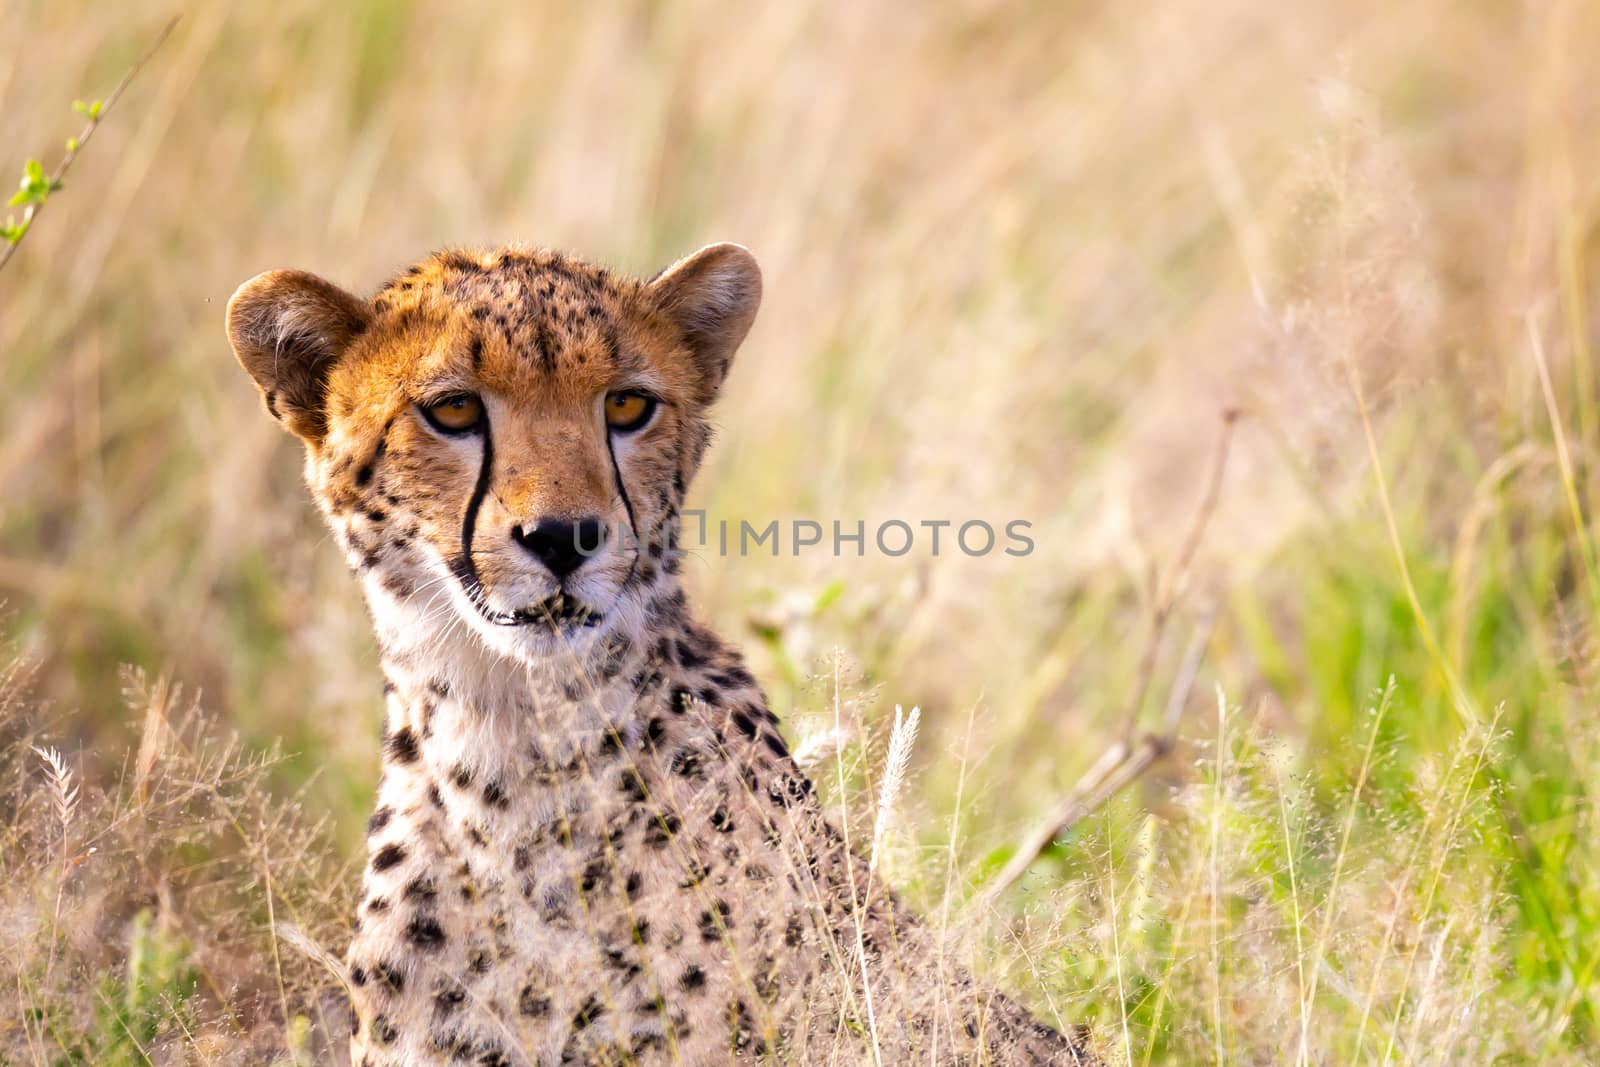 One portrait of a cheetah in the grass landscape